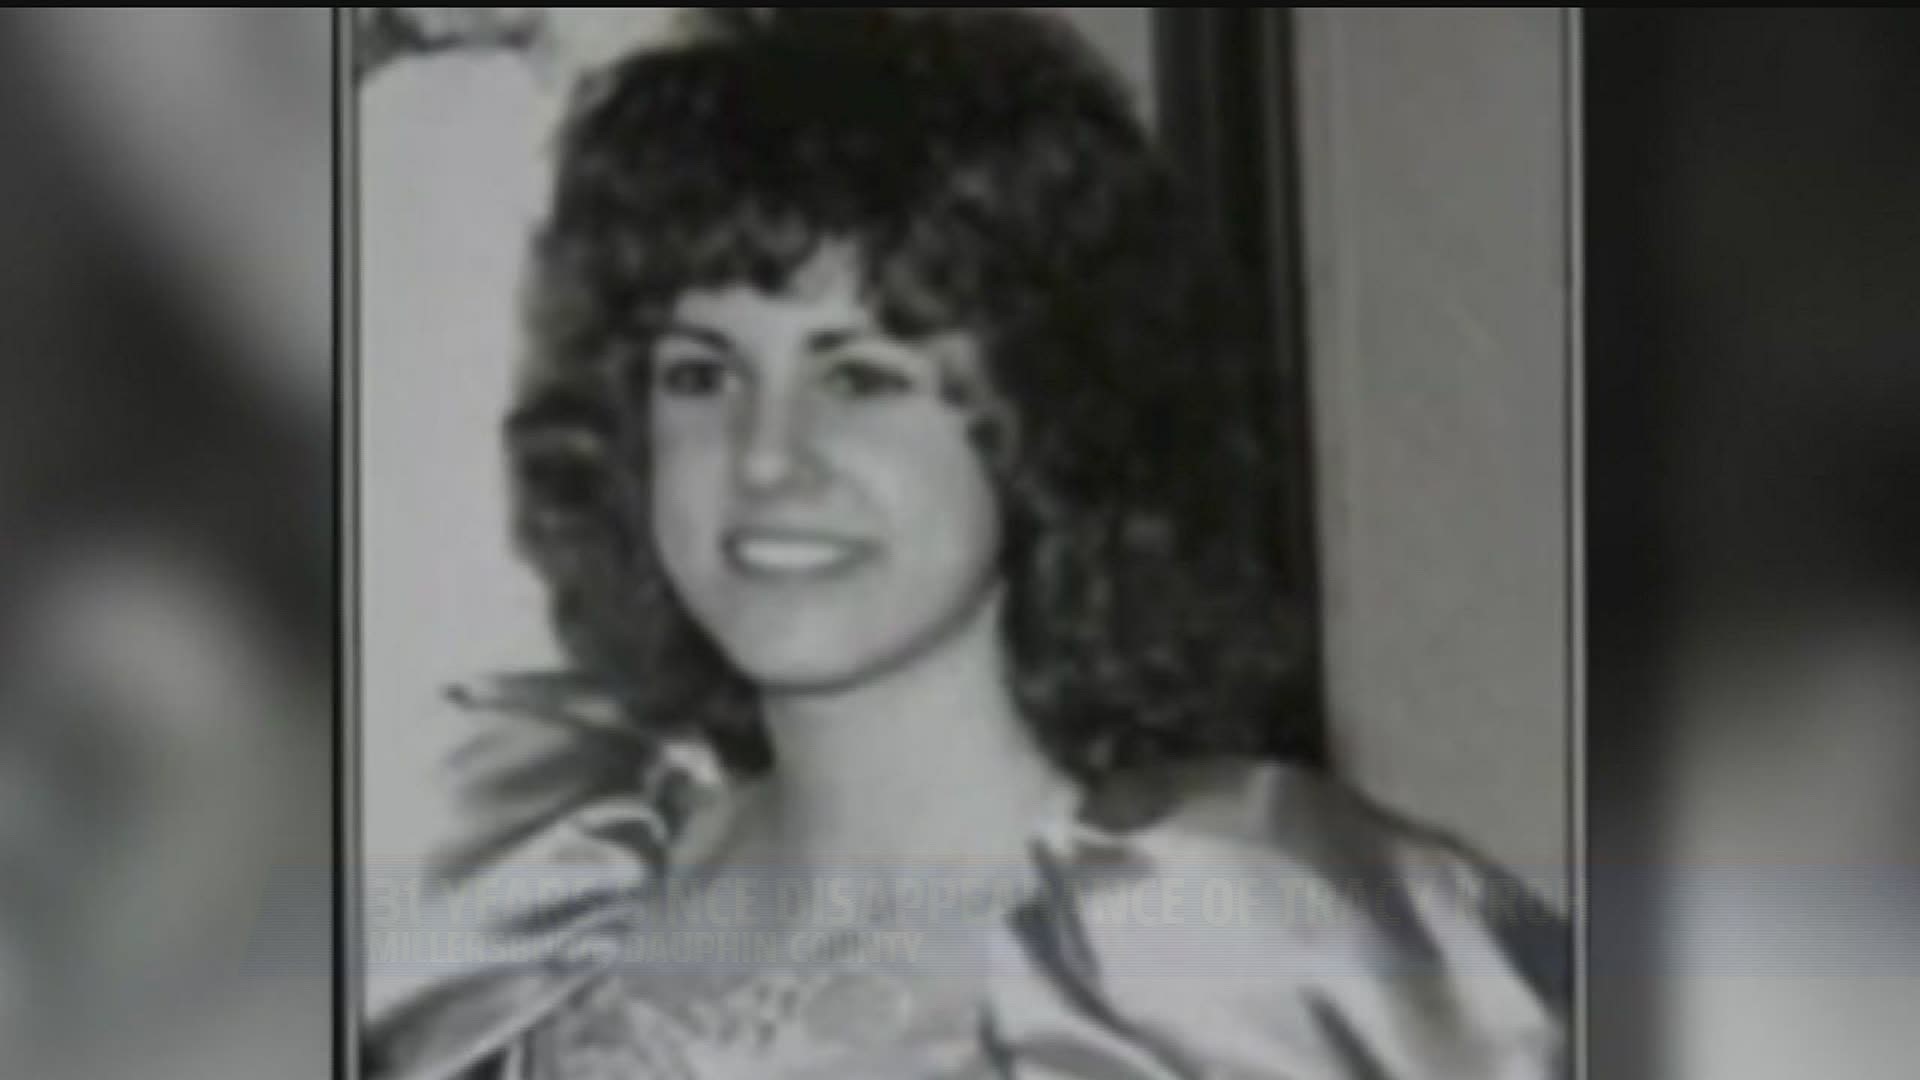 Exactly 31 years after teenager Tracy Kroh went missing from Millersburg, the investigation into her disappearance continues.